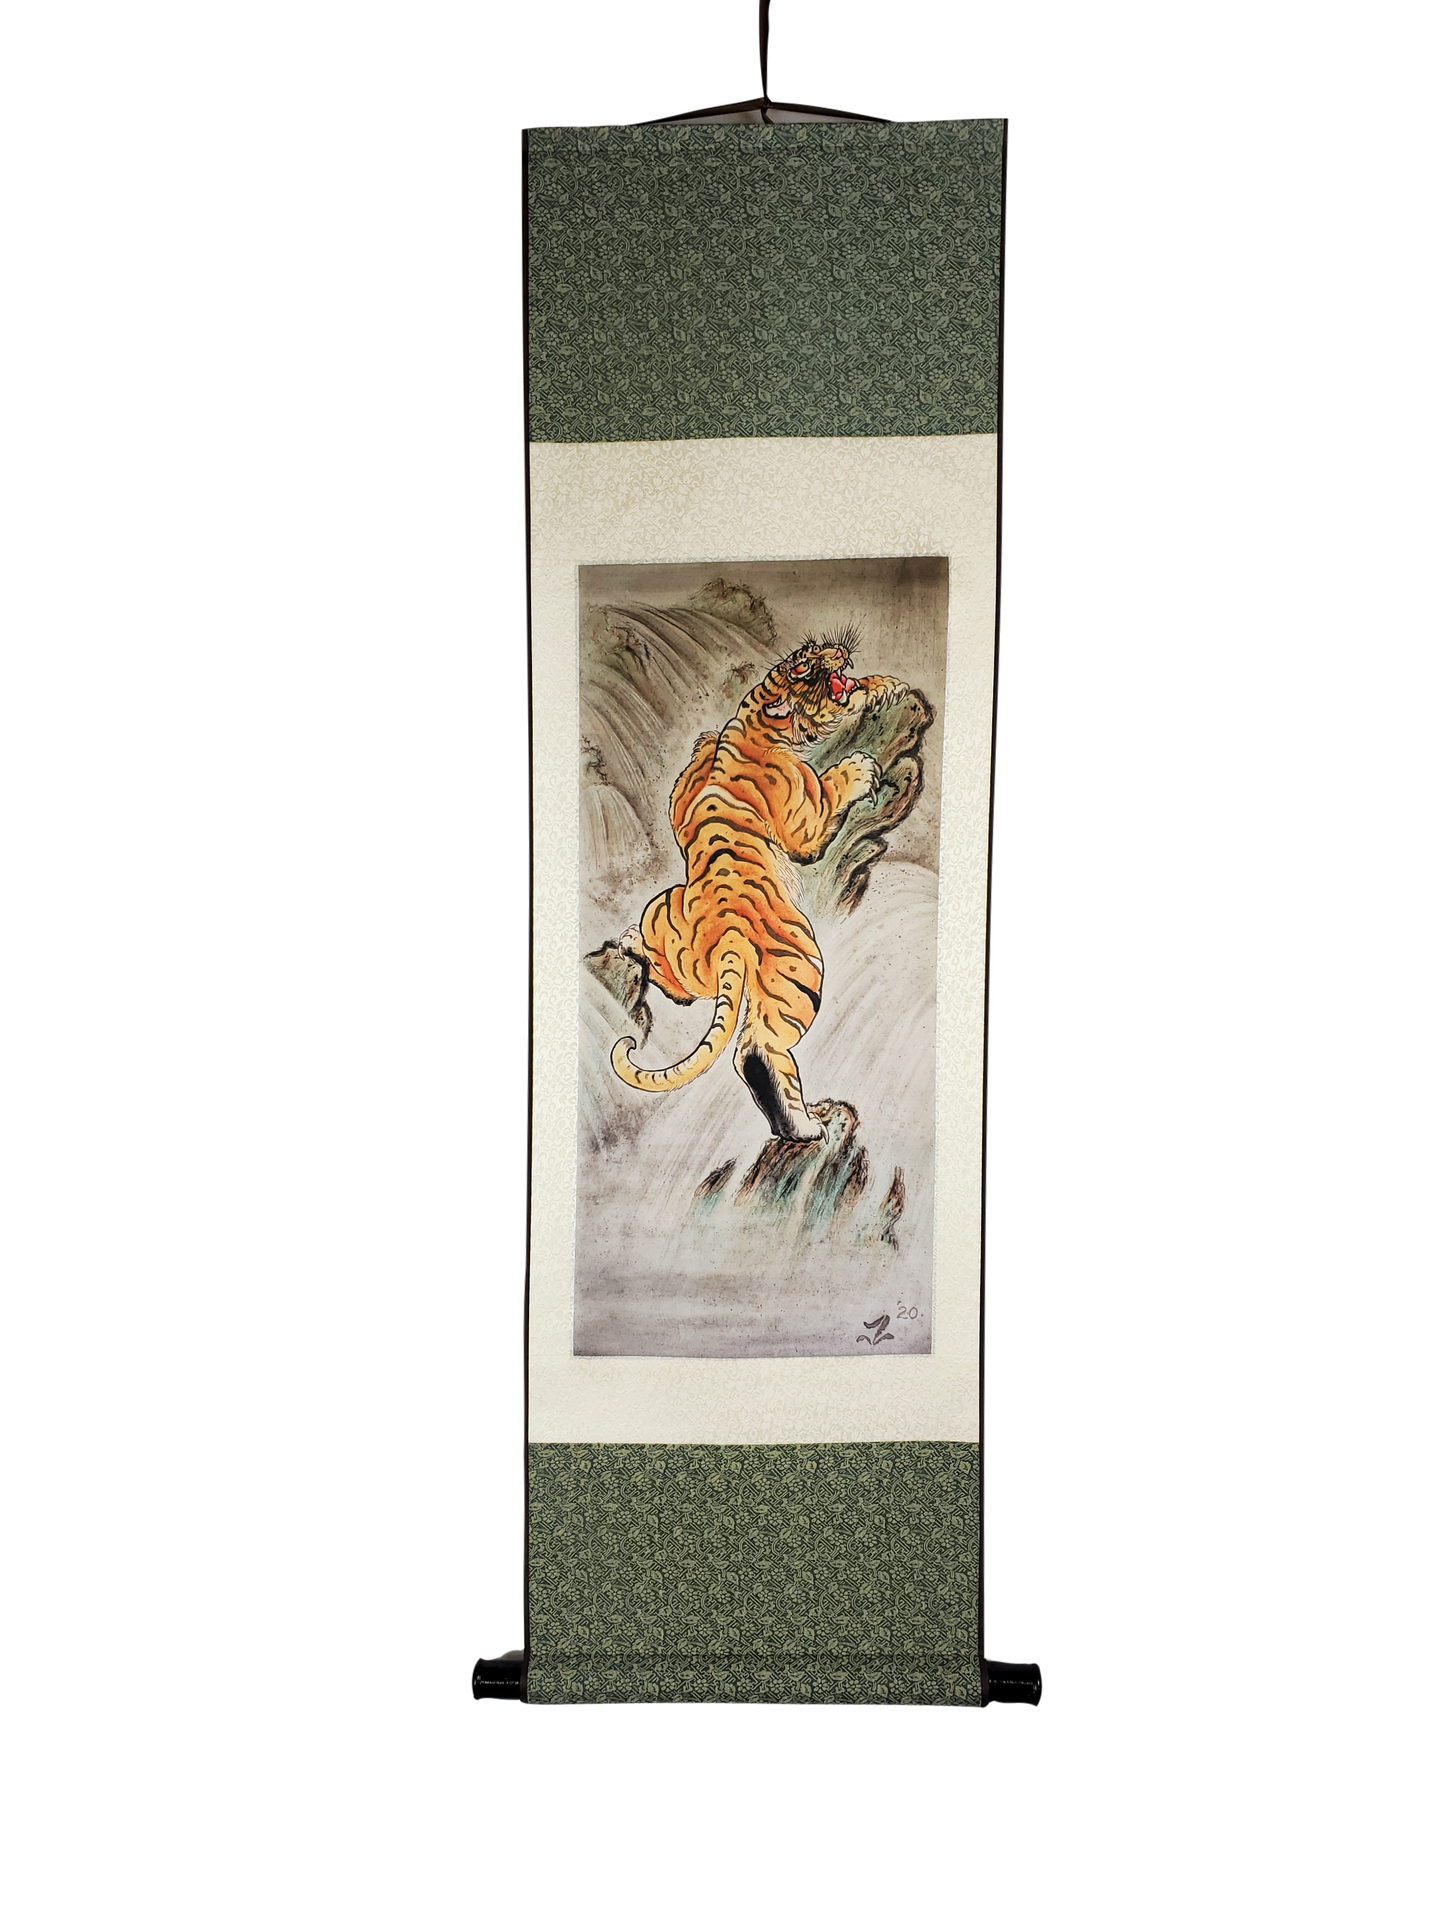 This amazing carnivorous tiger is climbing fast and furious to the top of the cliff to survey his surroundings. His long strides and spring like legs are ready to pounce, as he glances side to side in search of his next prey. This Japanese themed tiger scroll was influenced by Asian artwork.